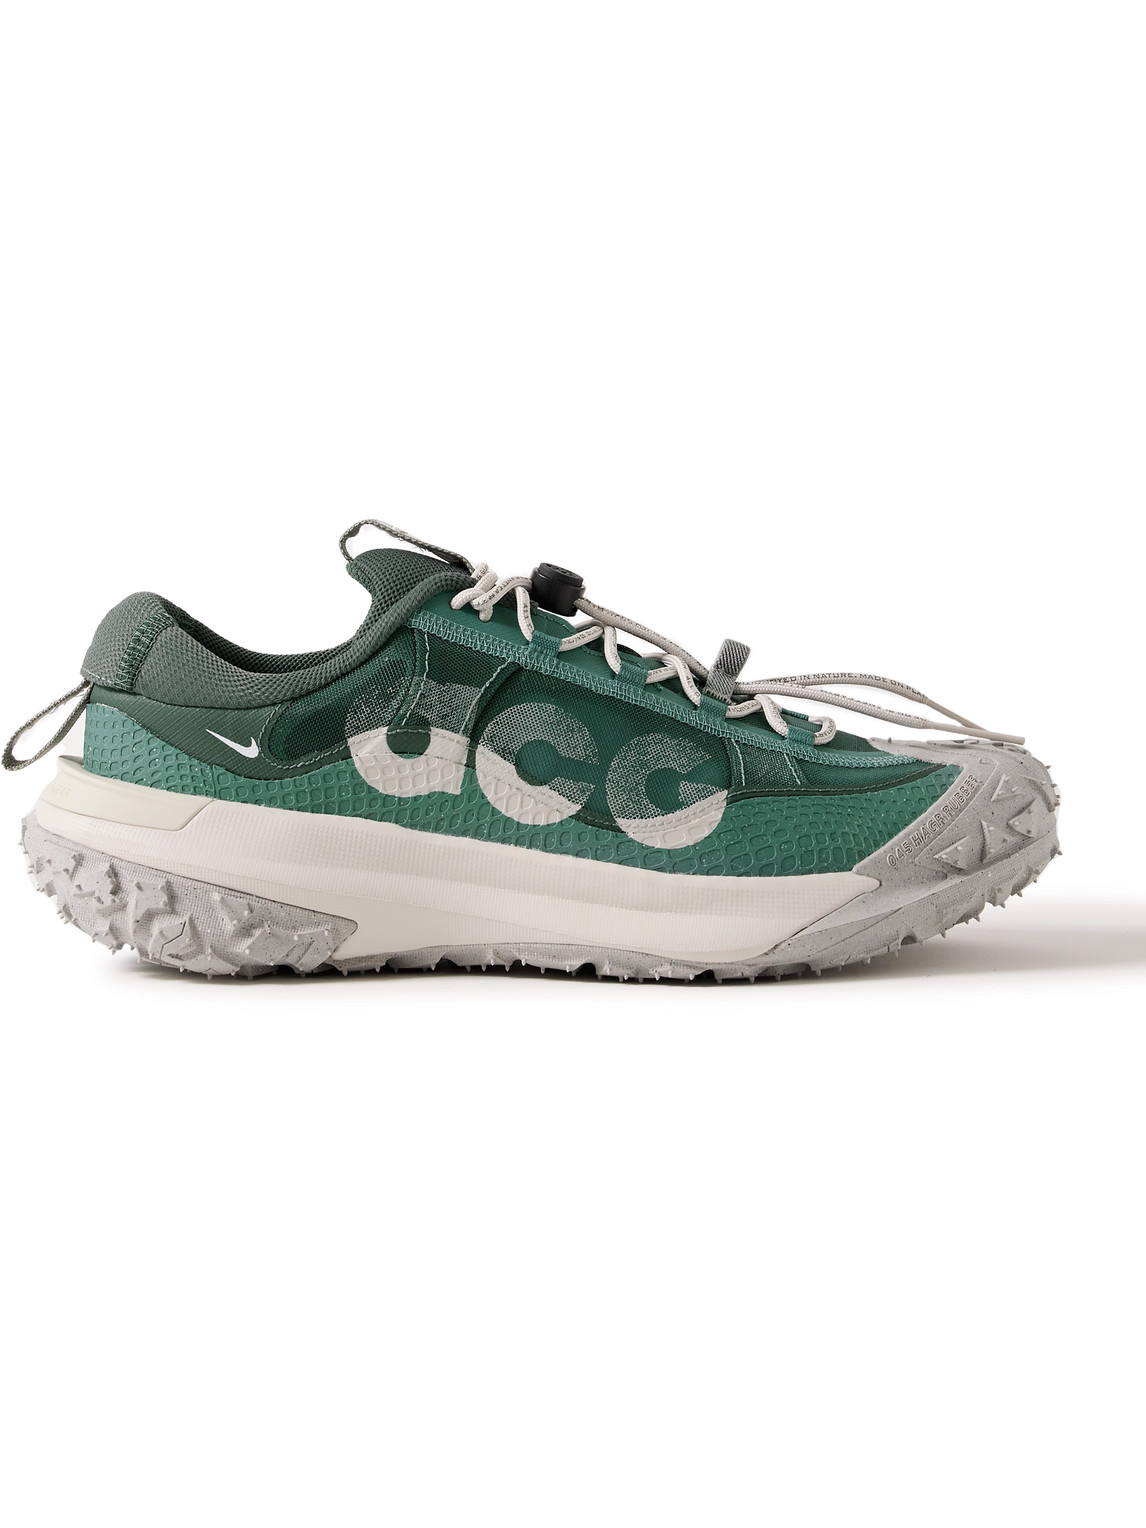 ACG Mountain Fly 2 Low Rubber-Trimmed Mesh Sneakers